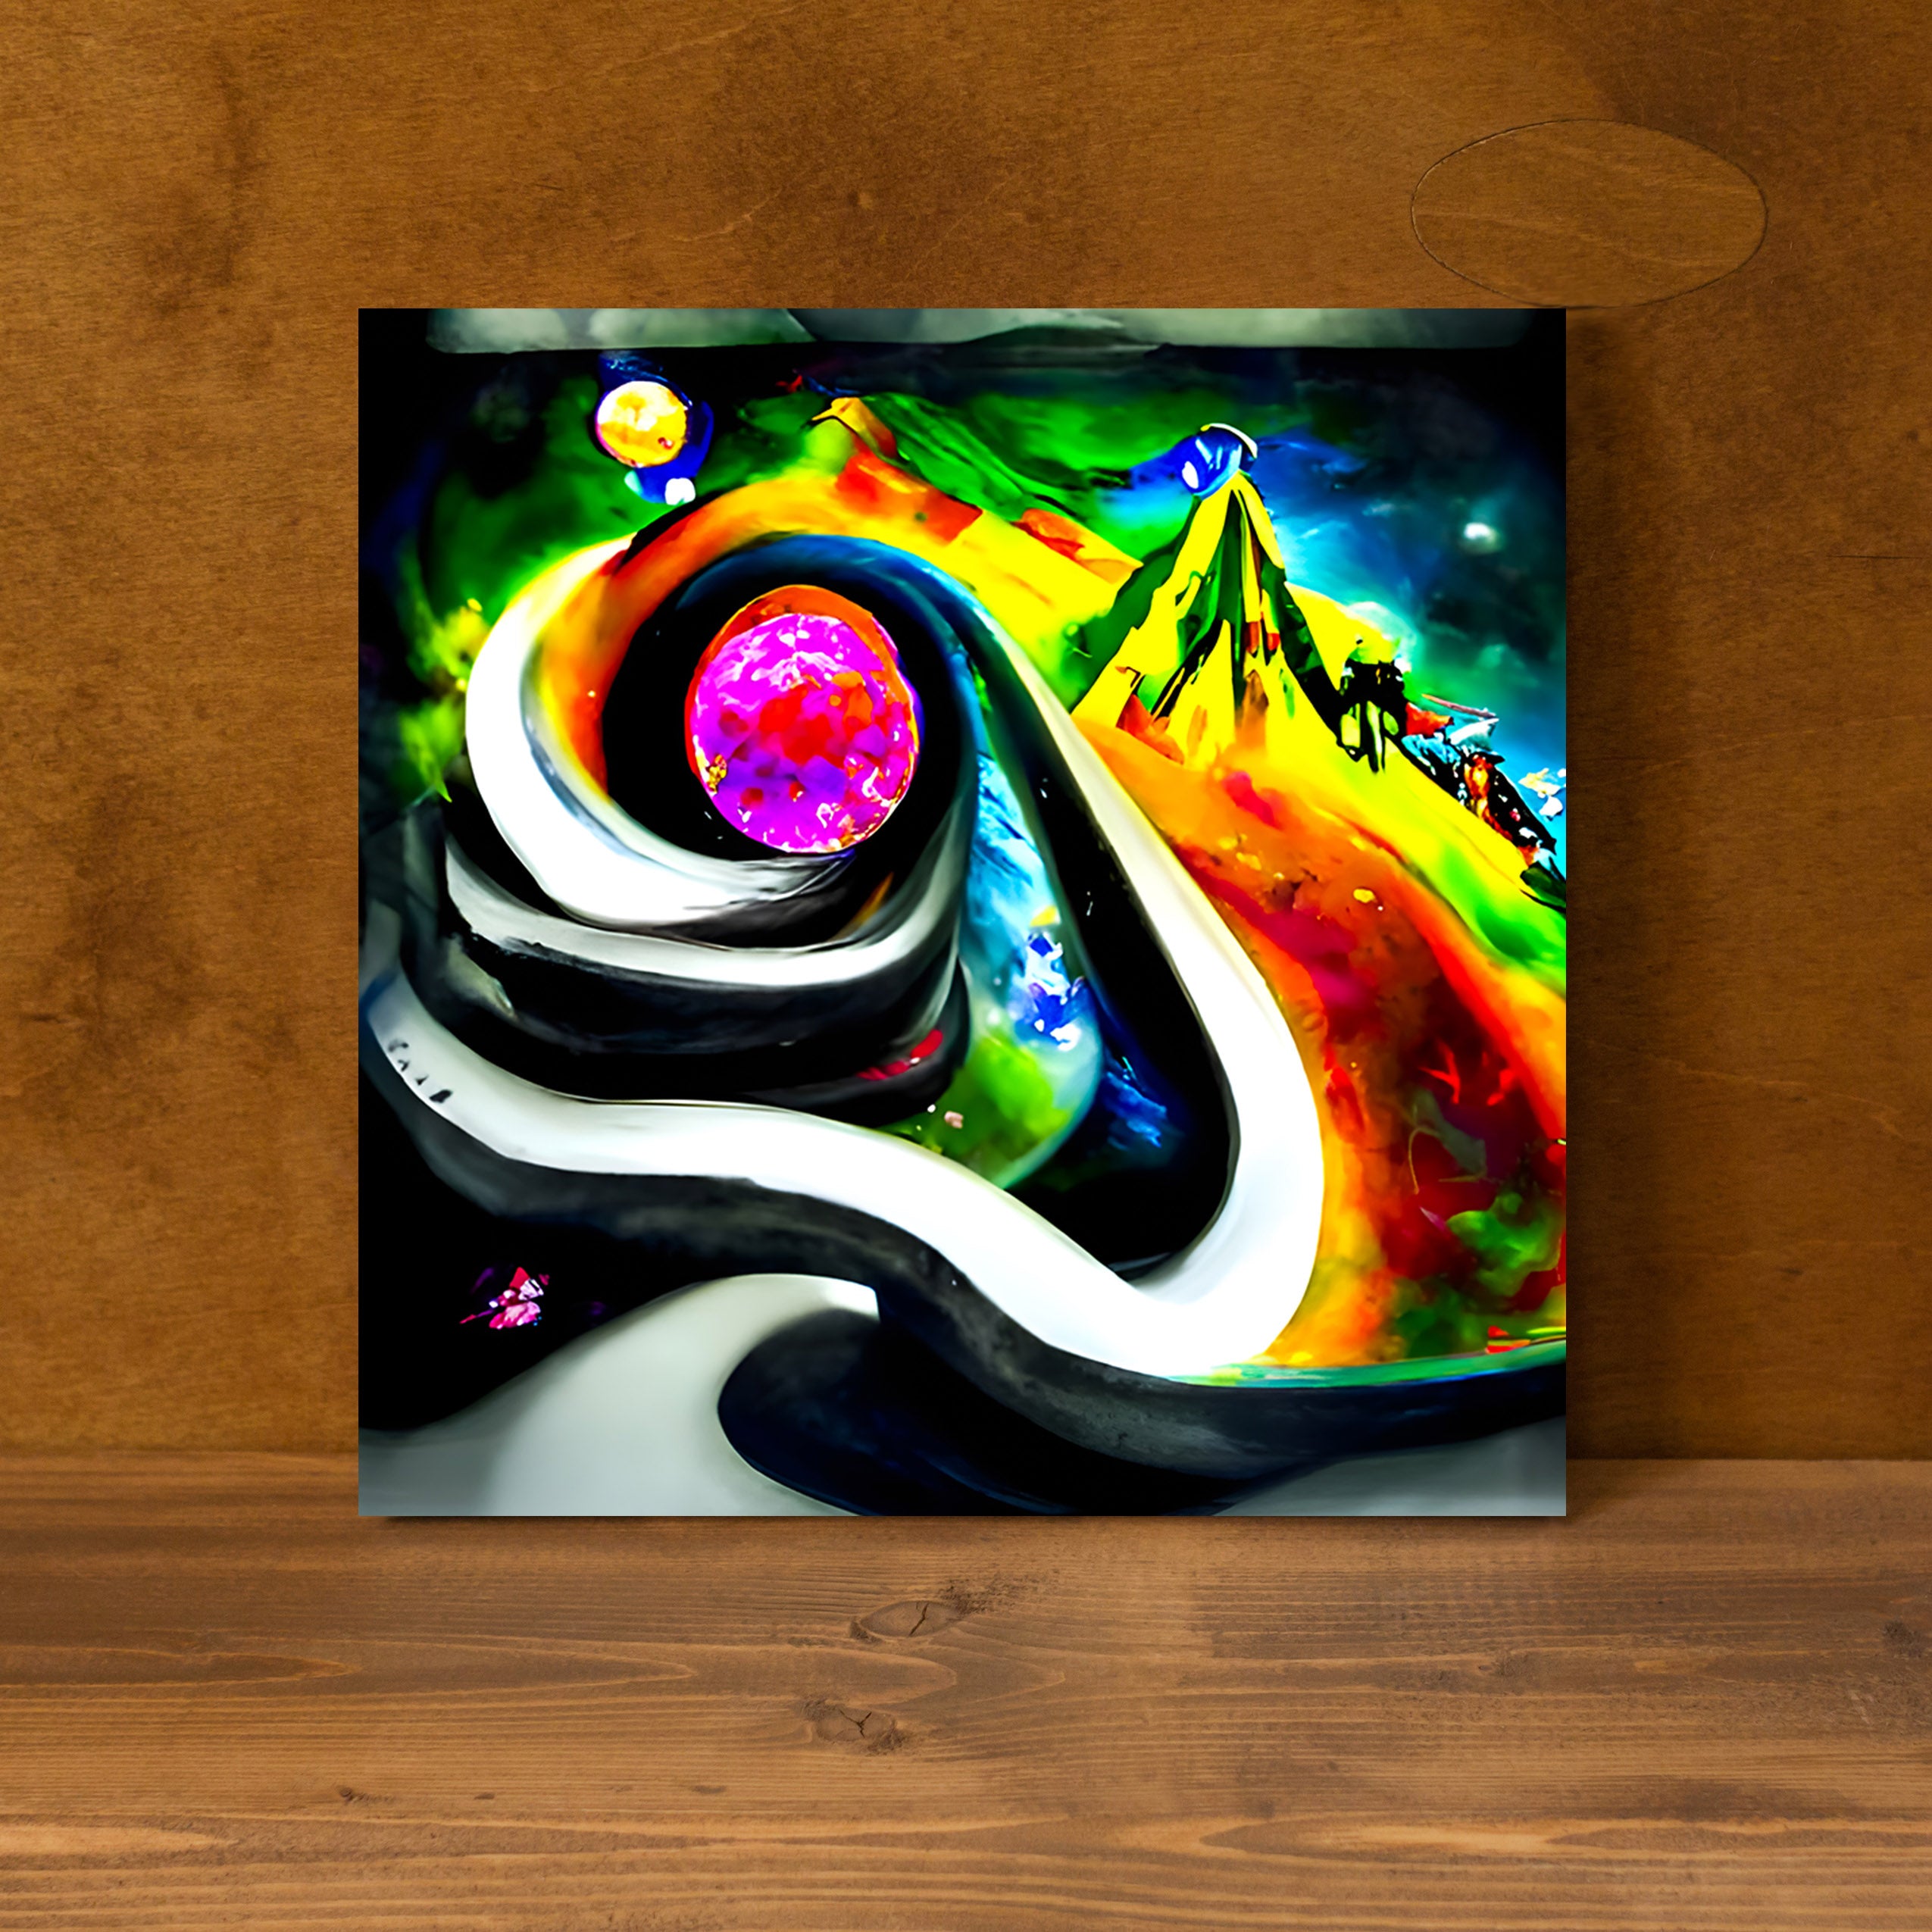 Do you want to slide down infinite mountains infinity street art colourful airbrush art watercolor cosmic moonscape spiraling